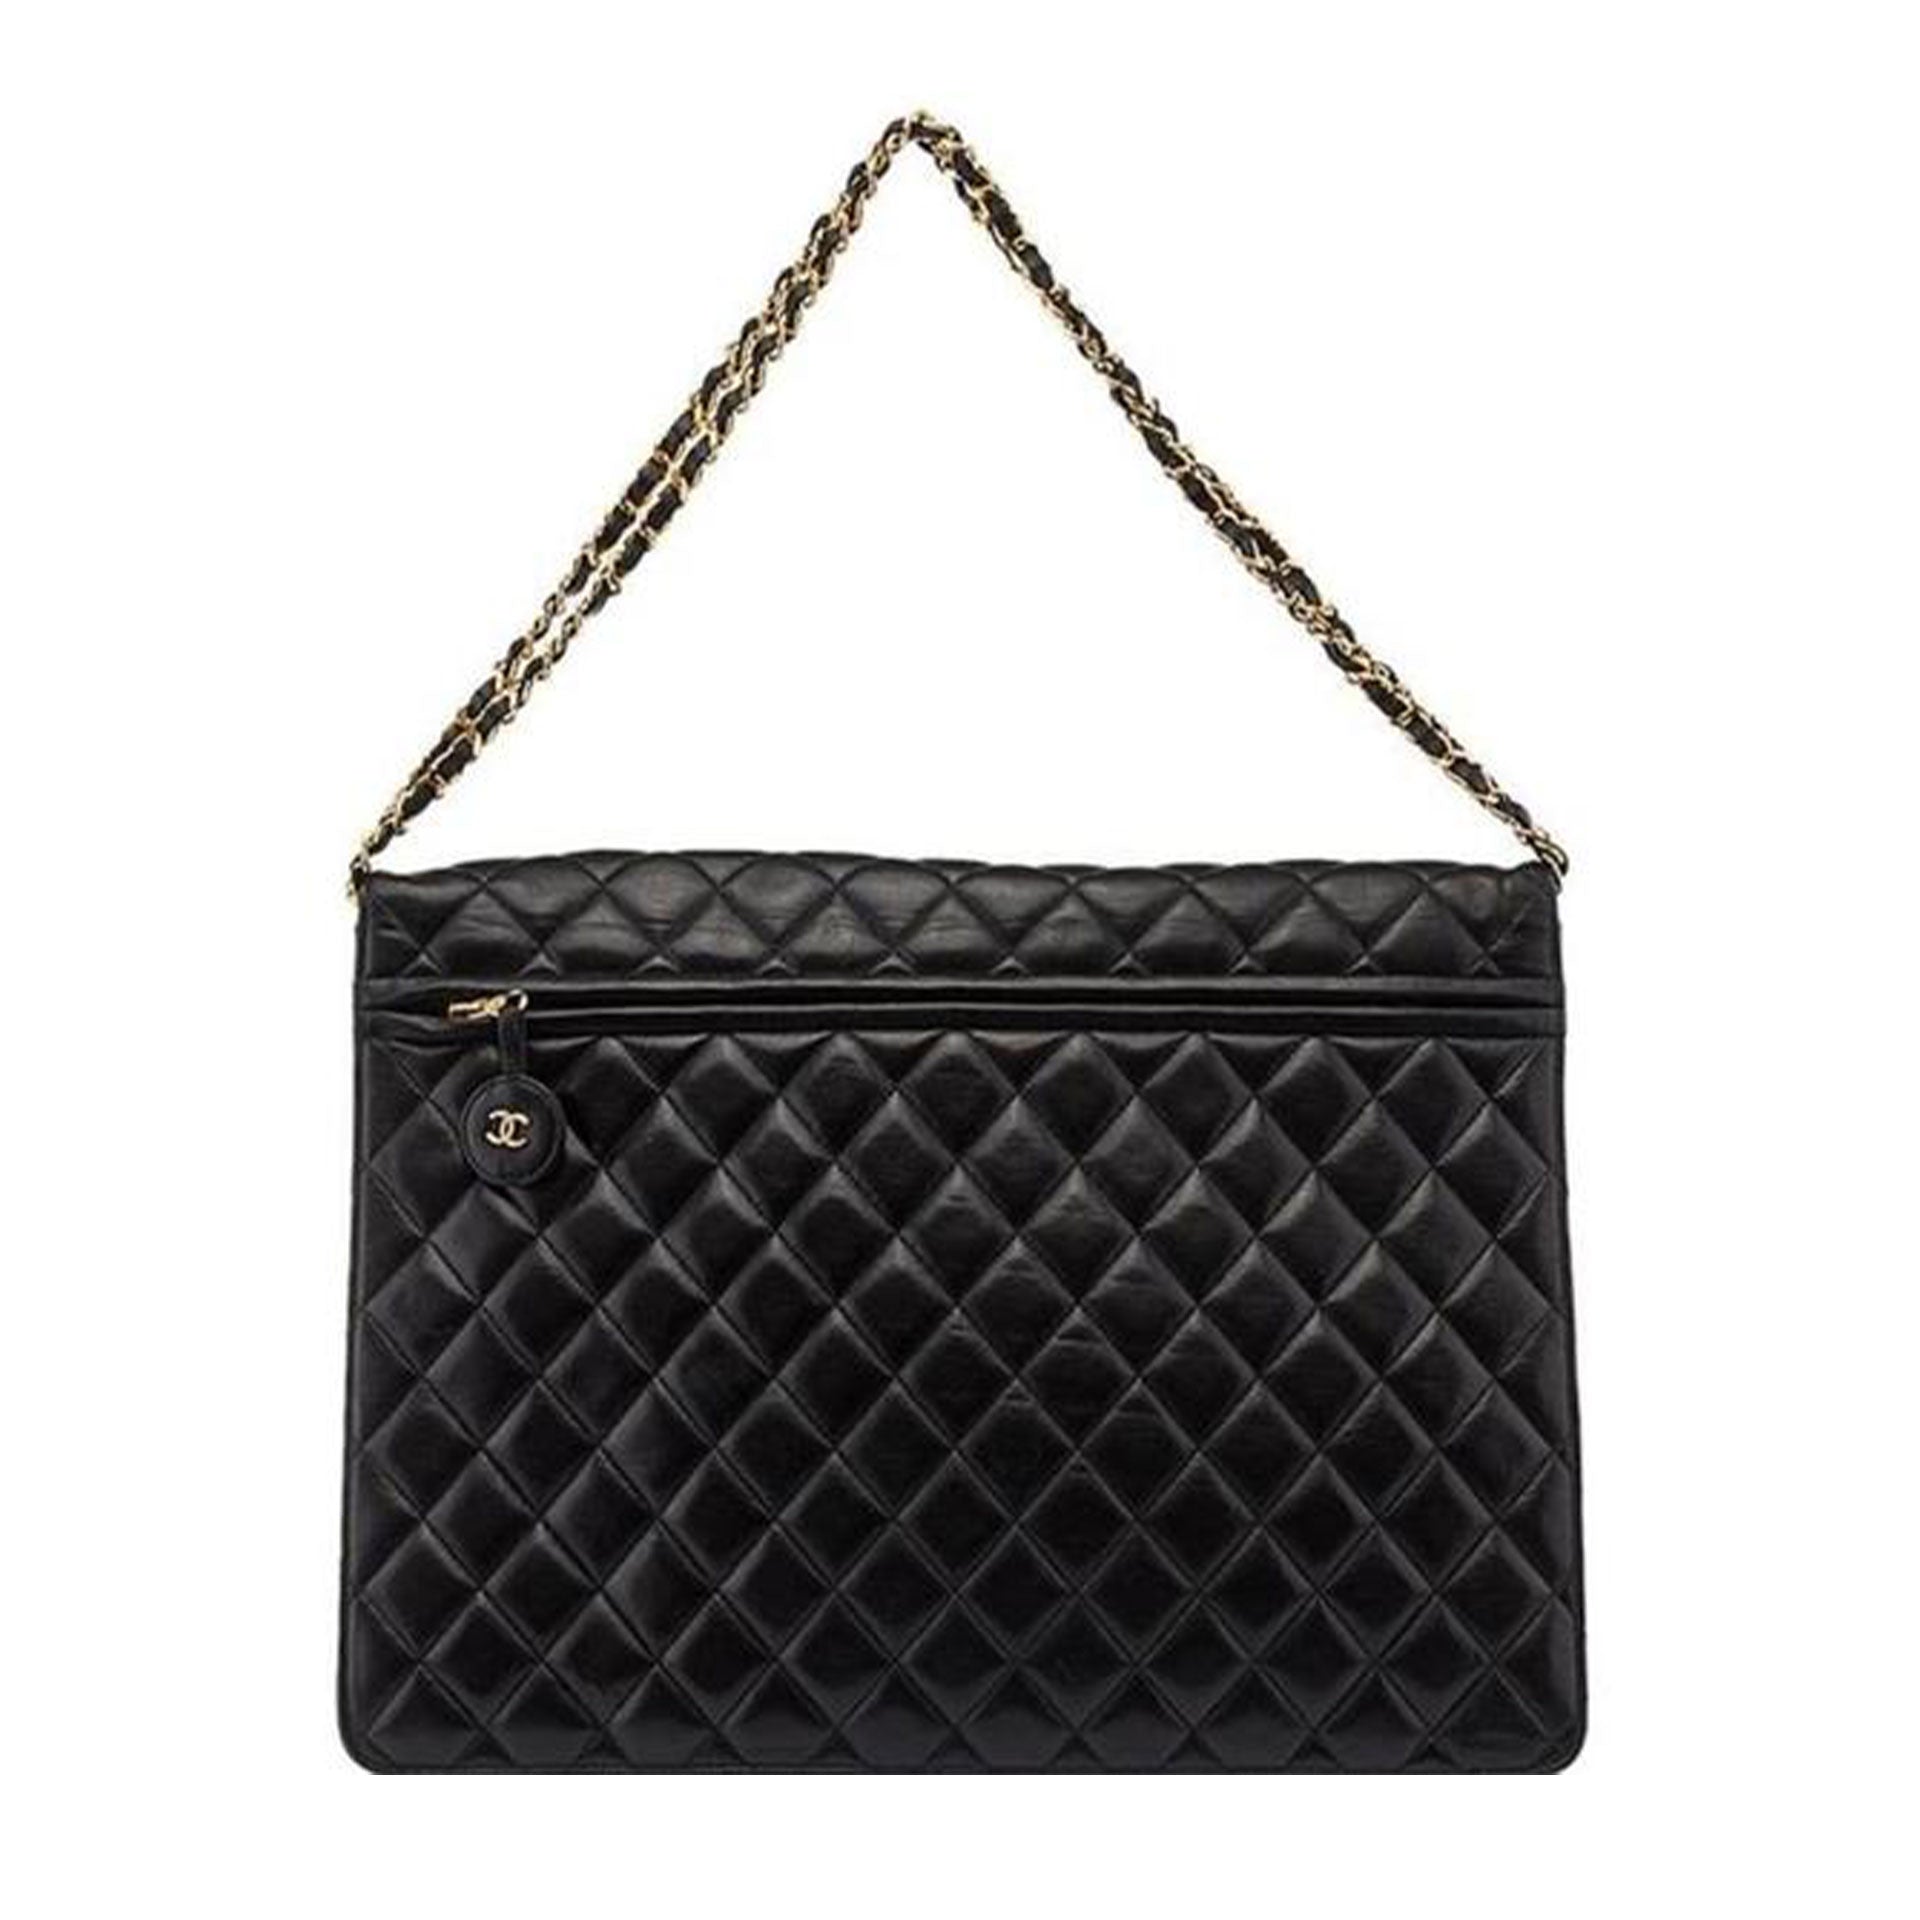 Extremely Rare Chanel Black Triangle Purse - 1980's